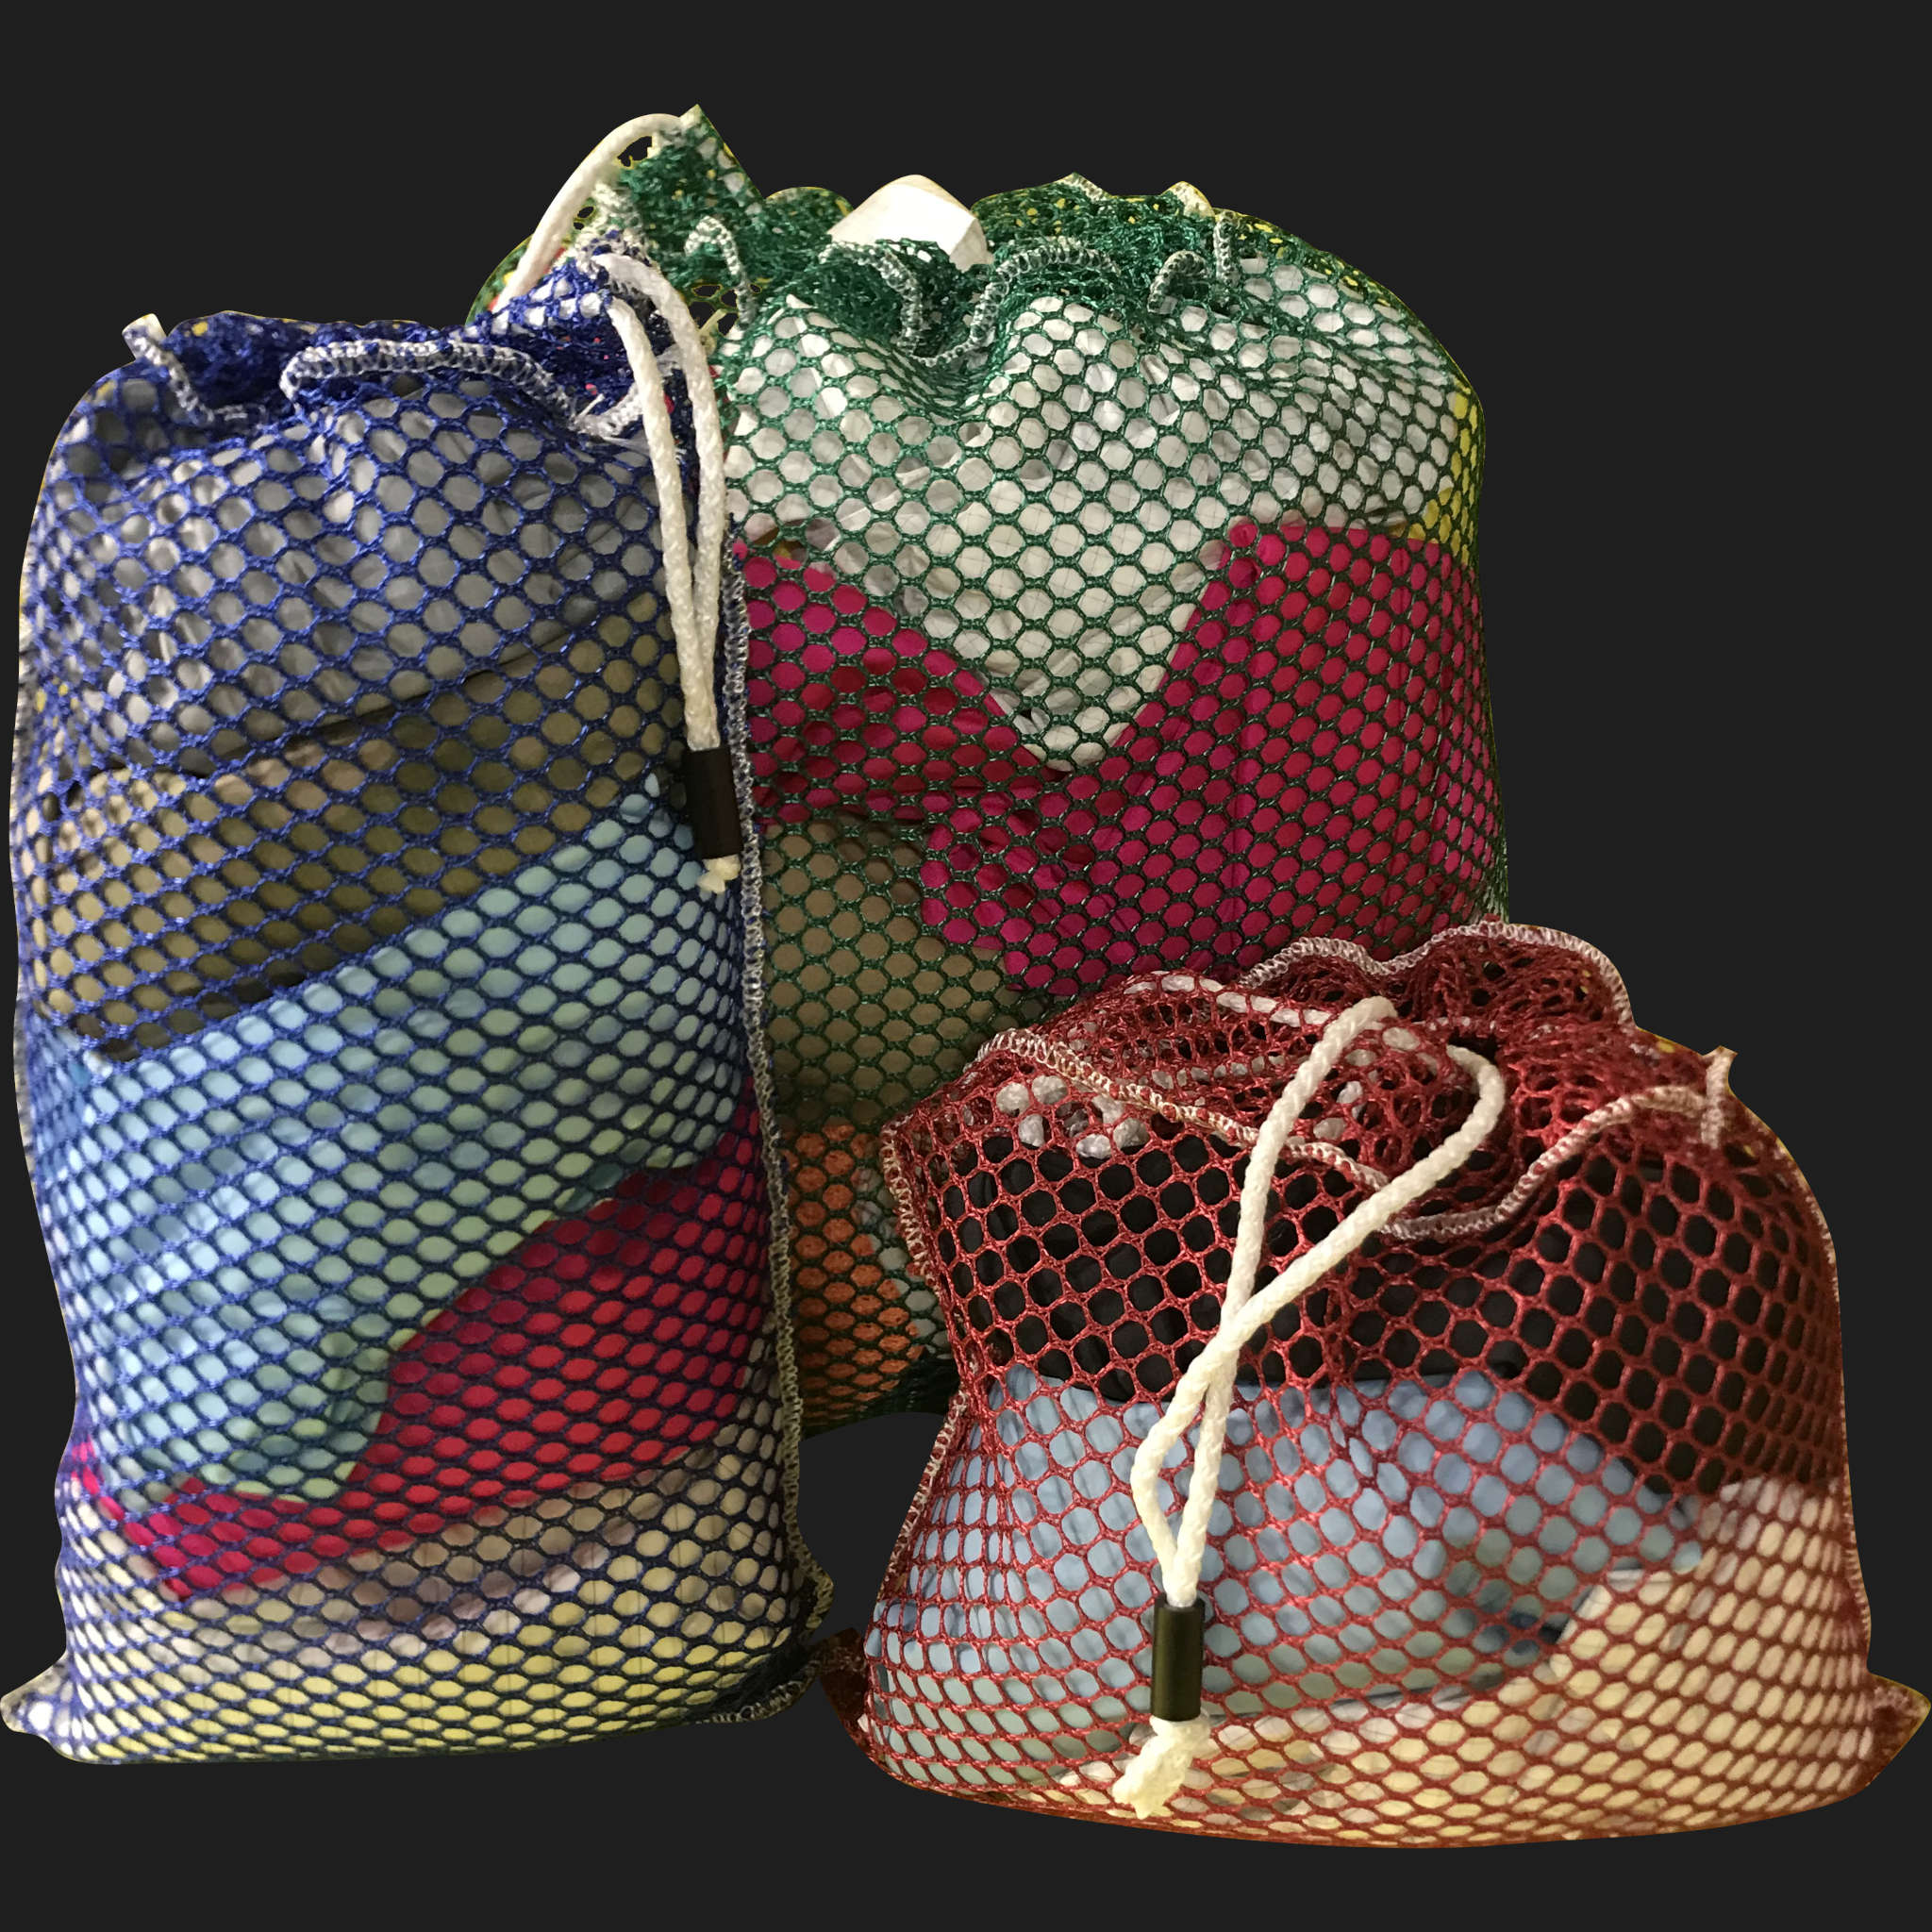 24" x 30" Customized Mesh-Net-Laundry Bags Heavy Duty with Cord and barrellock closure